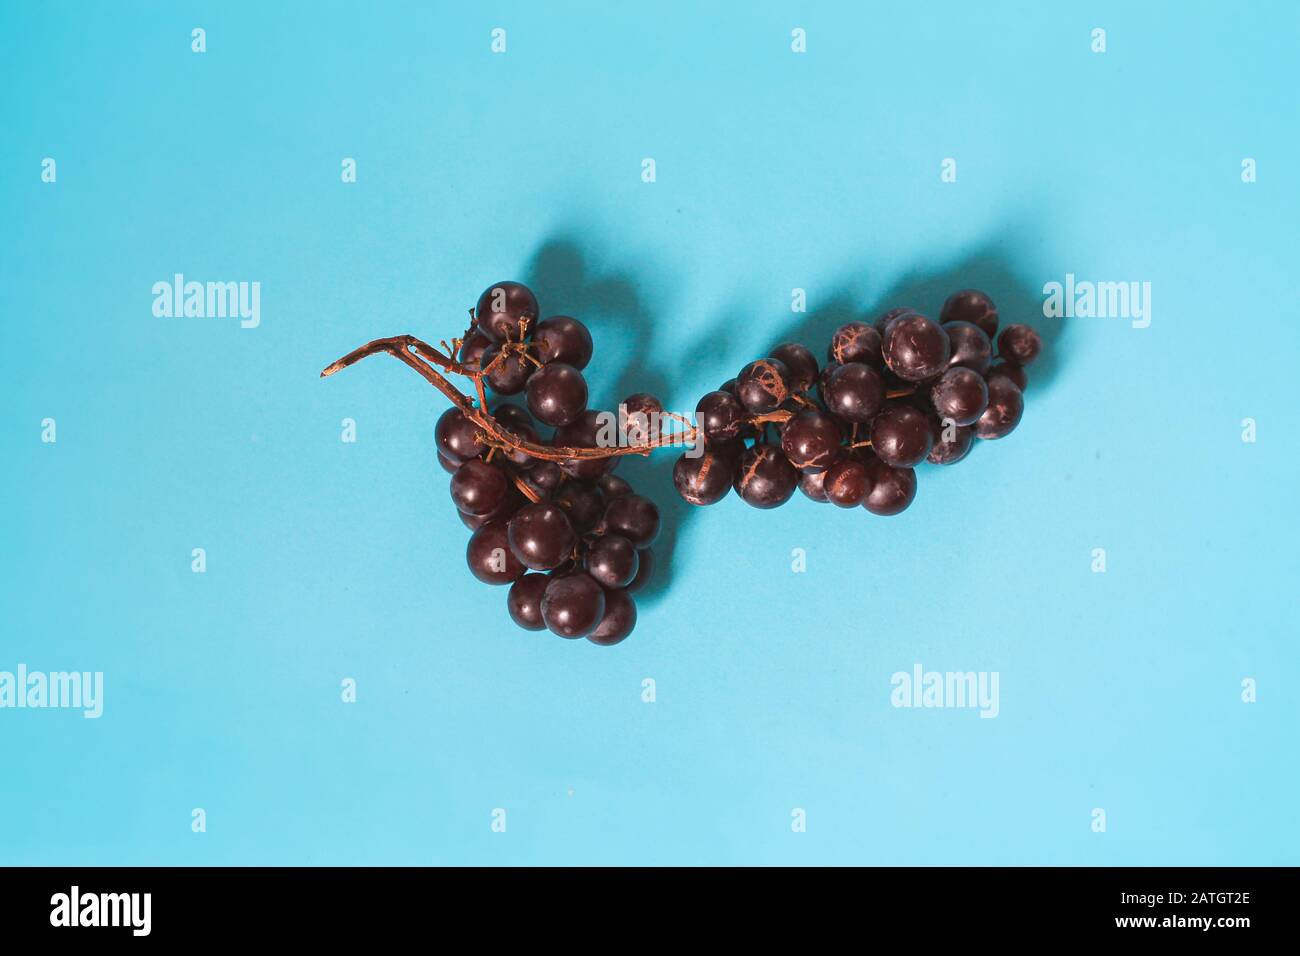 Ripe violet grapes against a bright blue background to show color contrast, concept of fun and pop culture Stock Photo